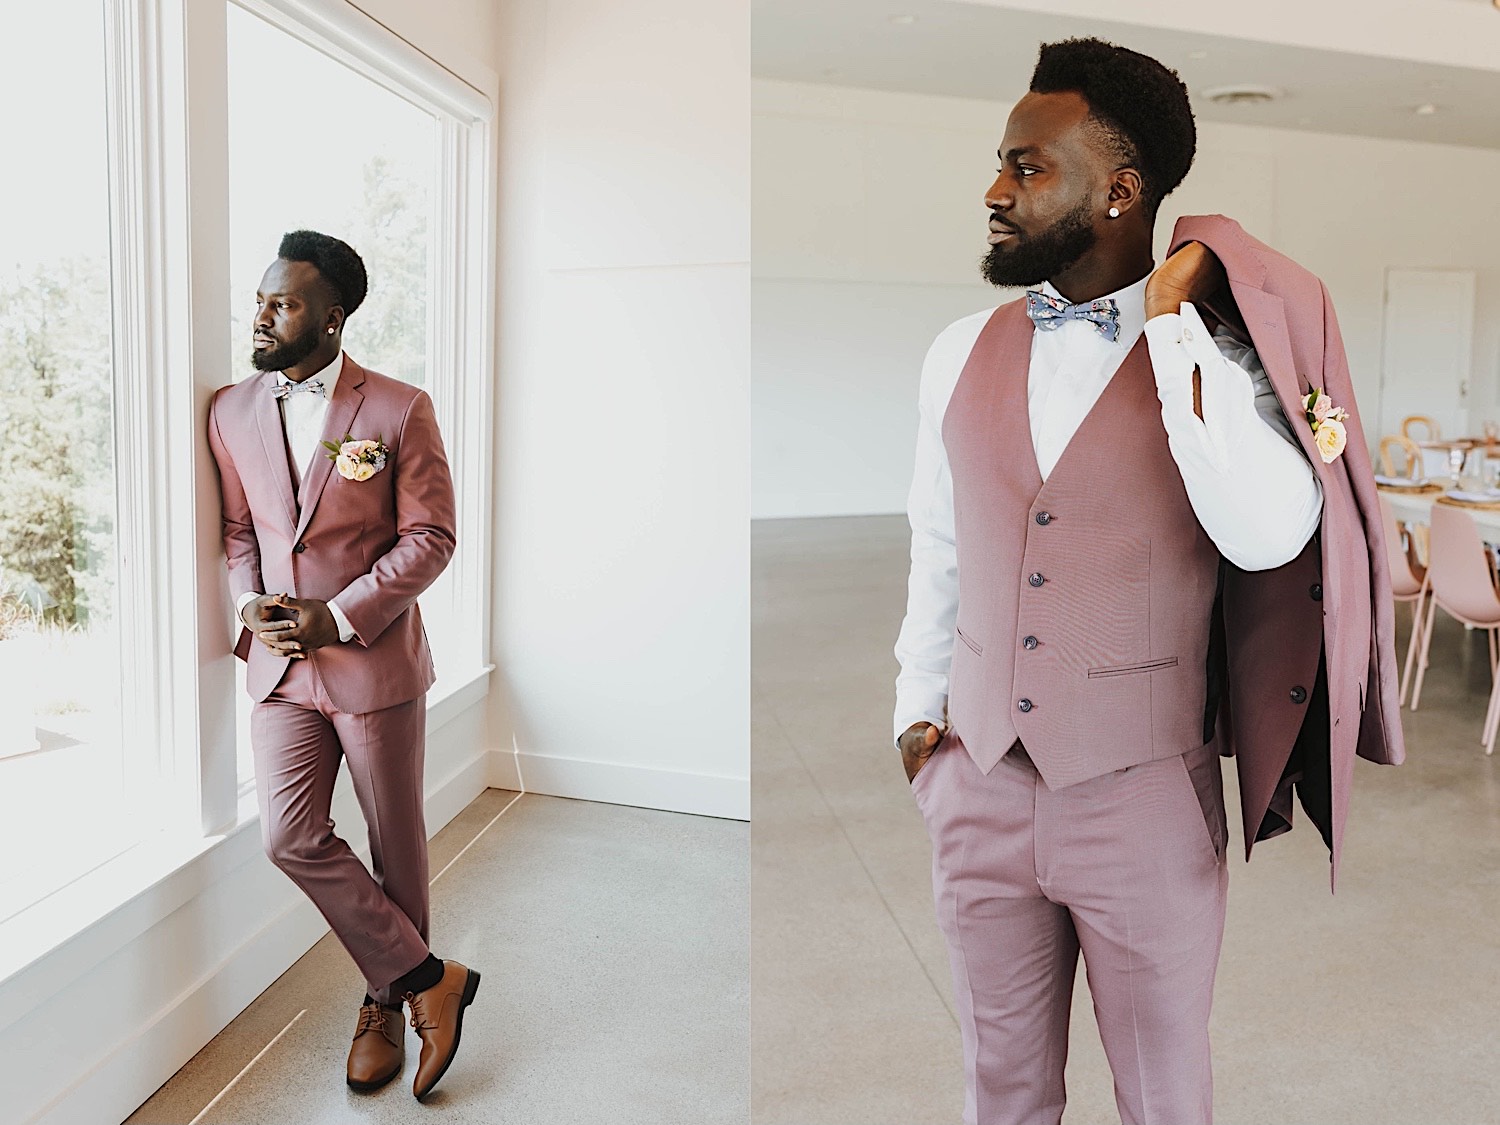 2 photos side by side of a groom, in the left photo he is posing next to a window and in the right he is holding his suit coat over his shoulder